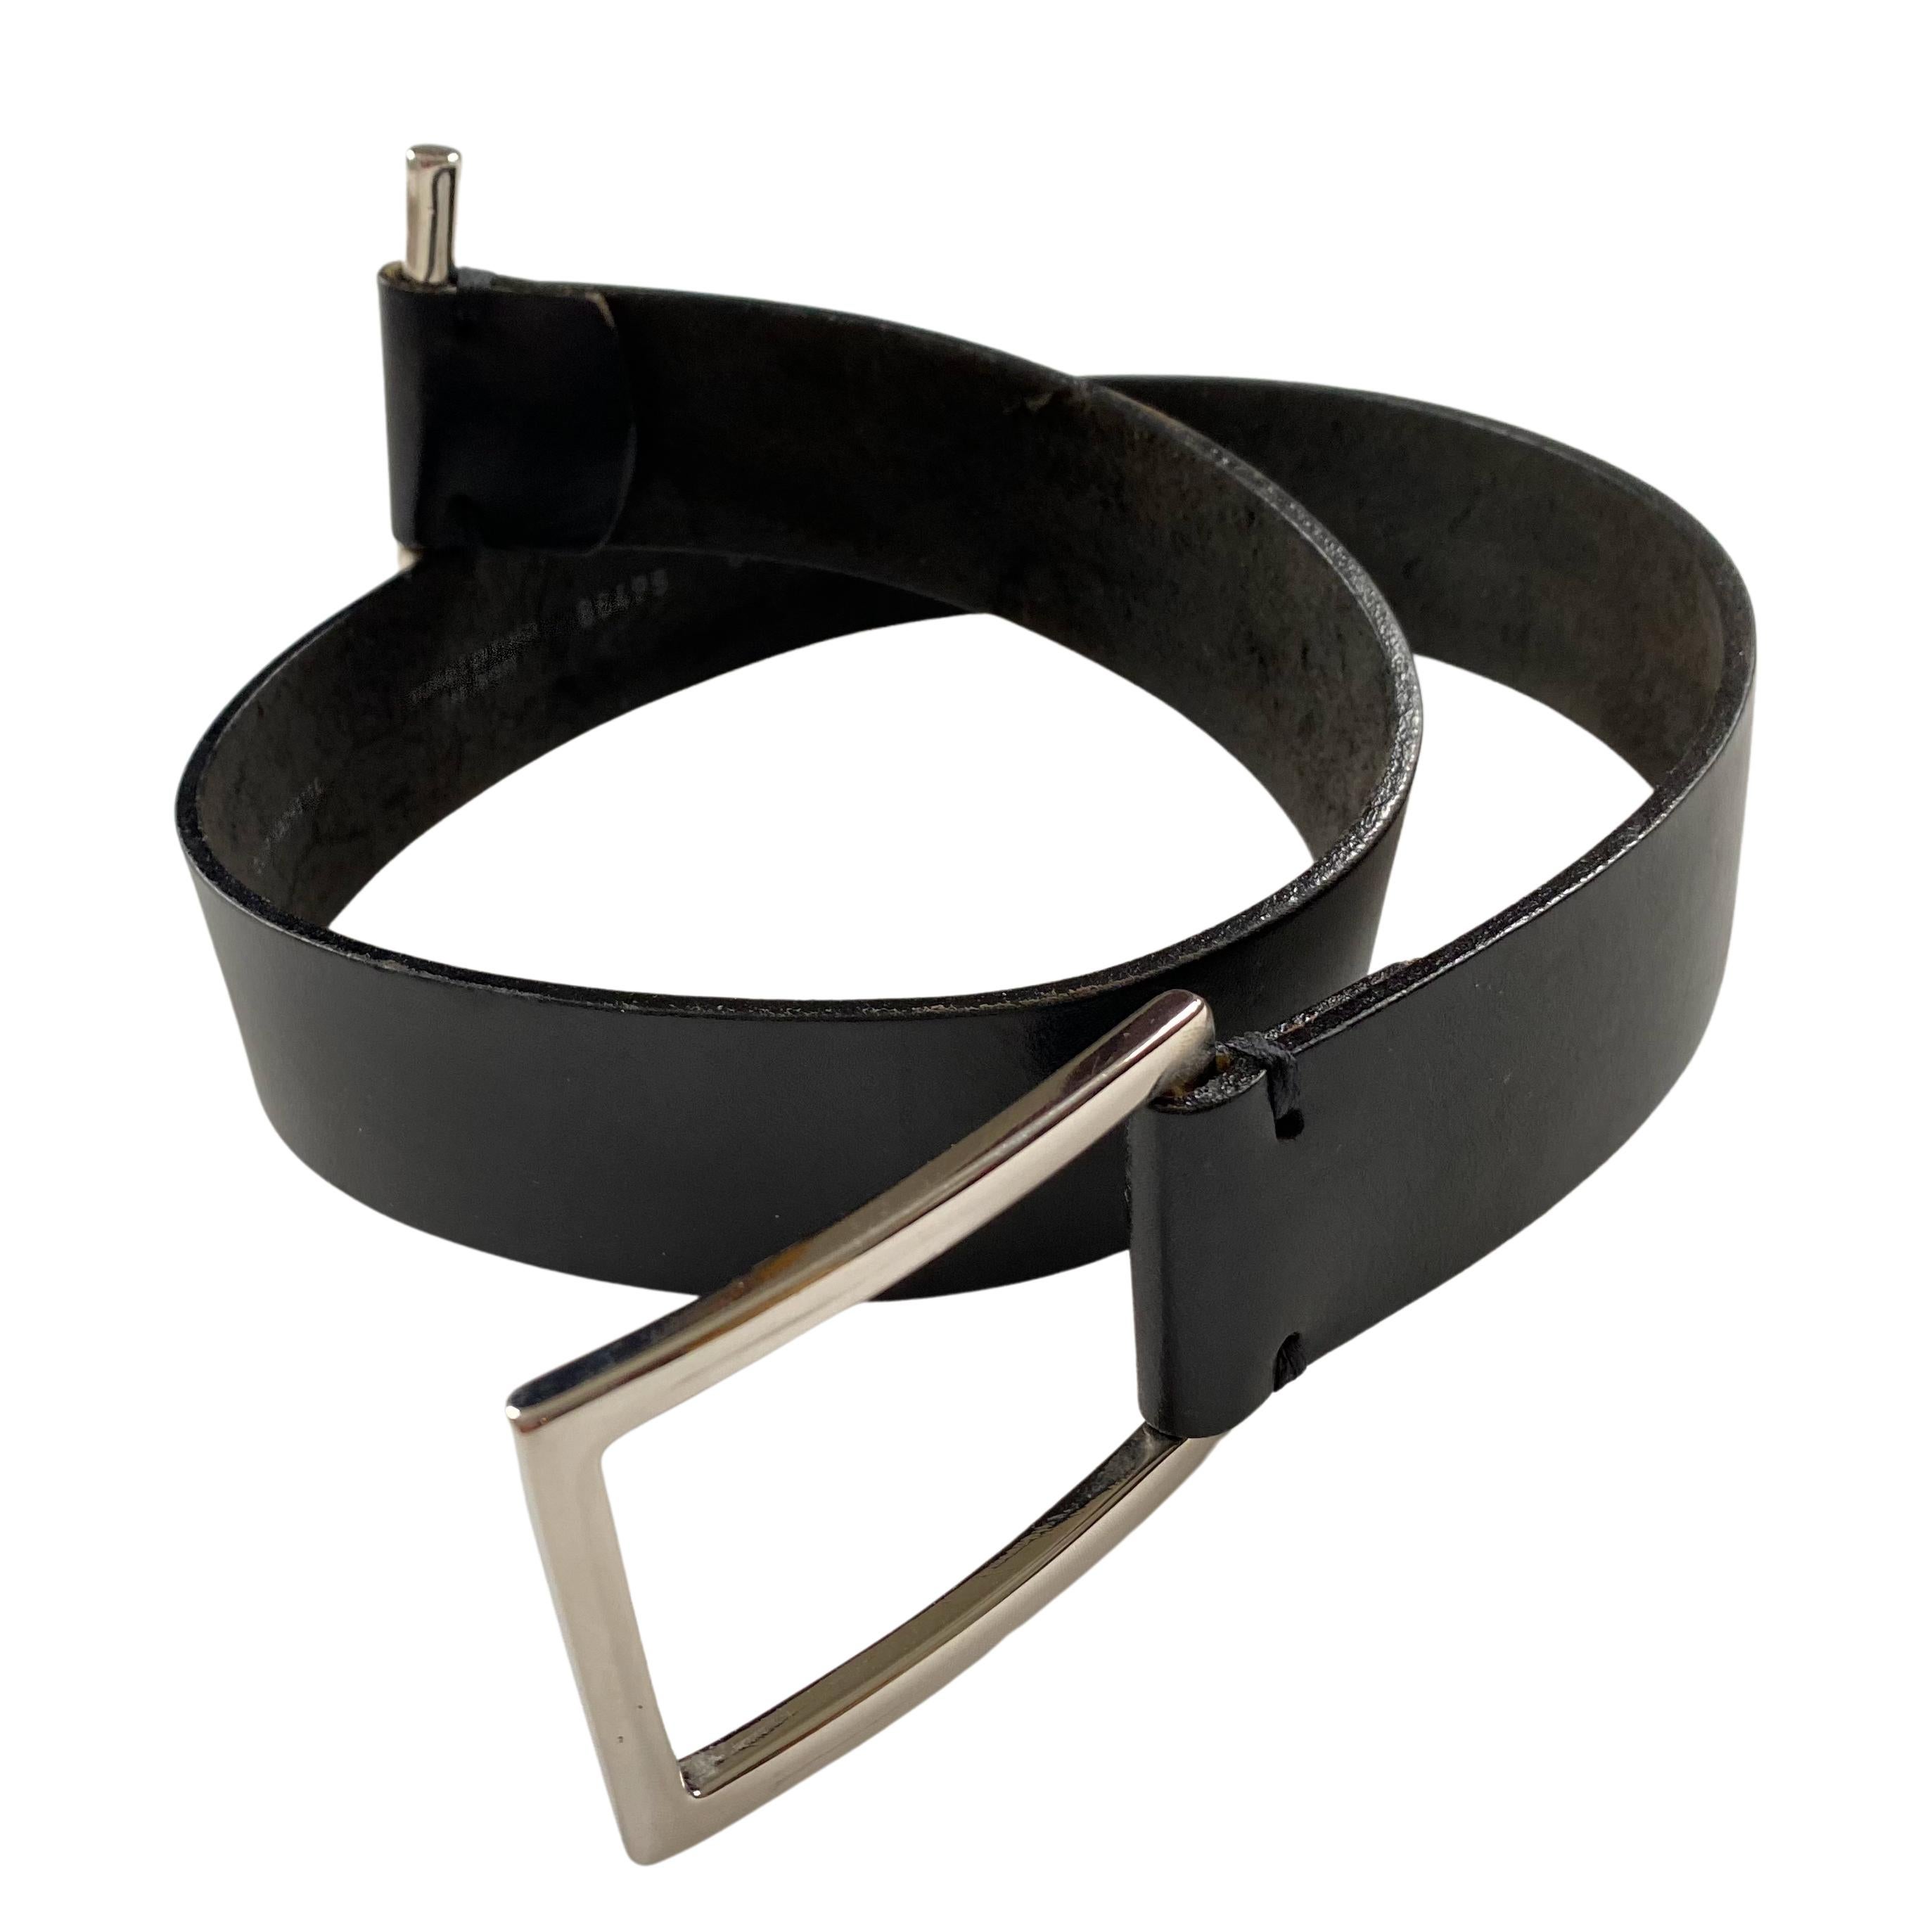 Make every outfit a très chic statement with this stylish agnès b. belt.

Bold, modern yet understated.
Material: cow-hide leather (Cuir Vachette)  
1.5